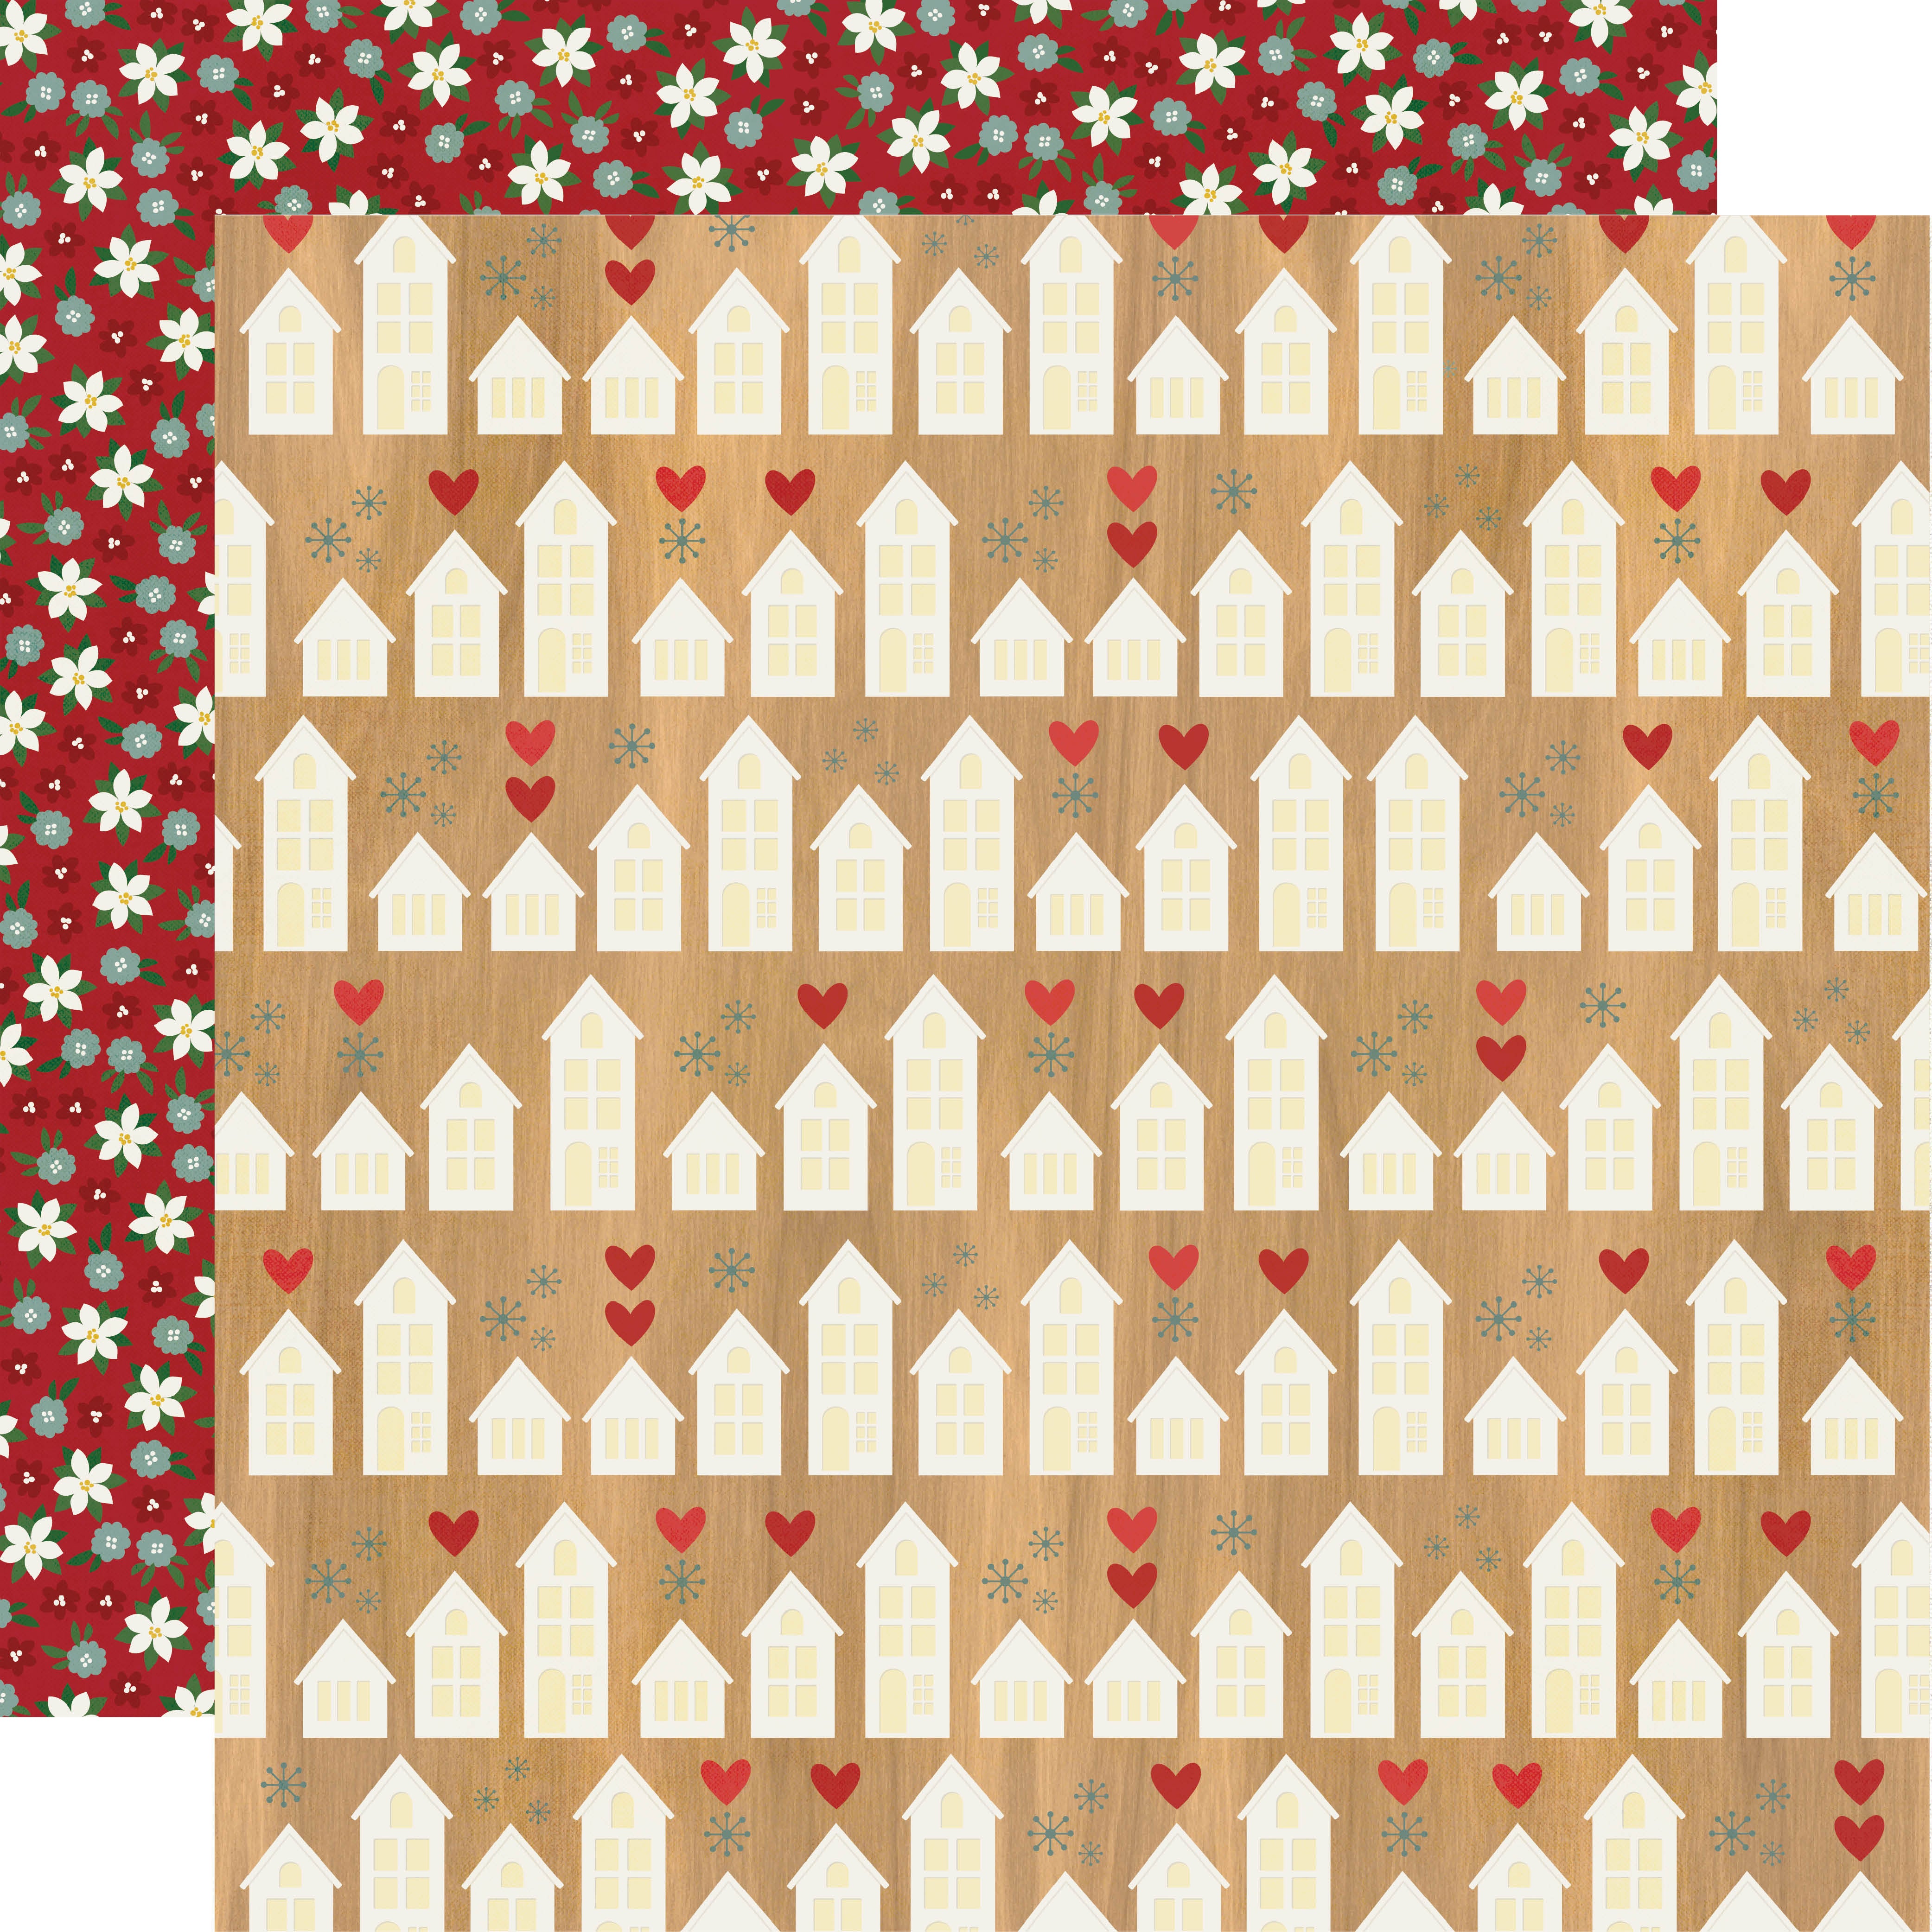 Hearth & Holiday Collection 12 x 12 Scrapbook Paper & Sticker Collection Kit by Simple Stories